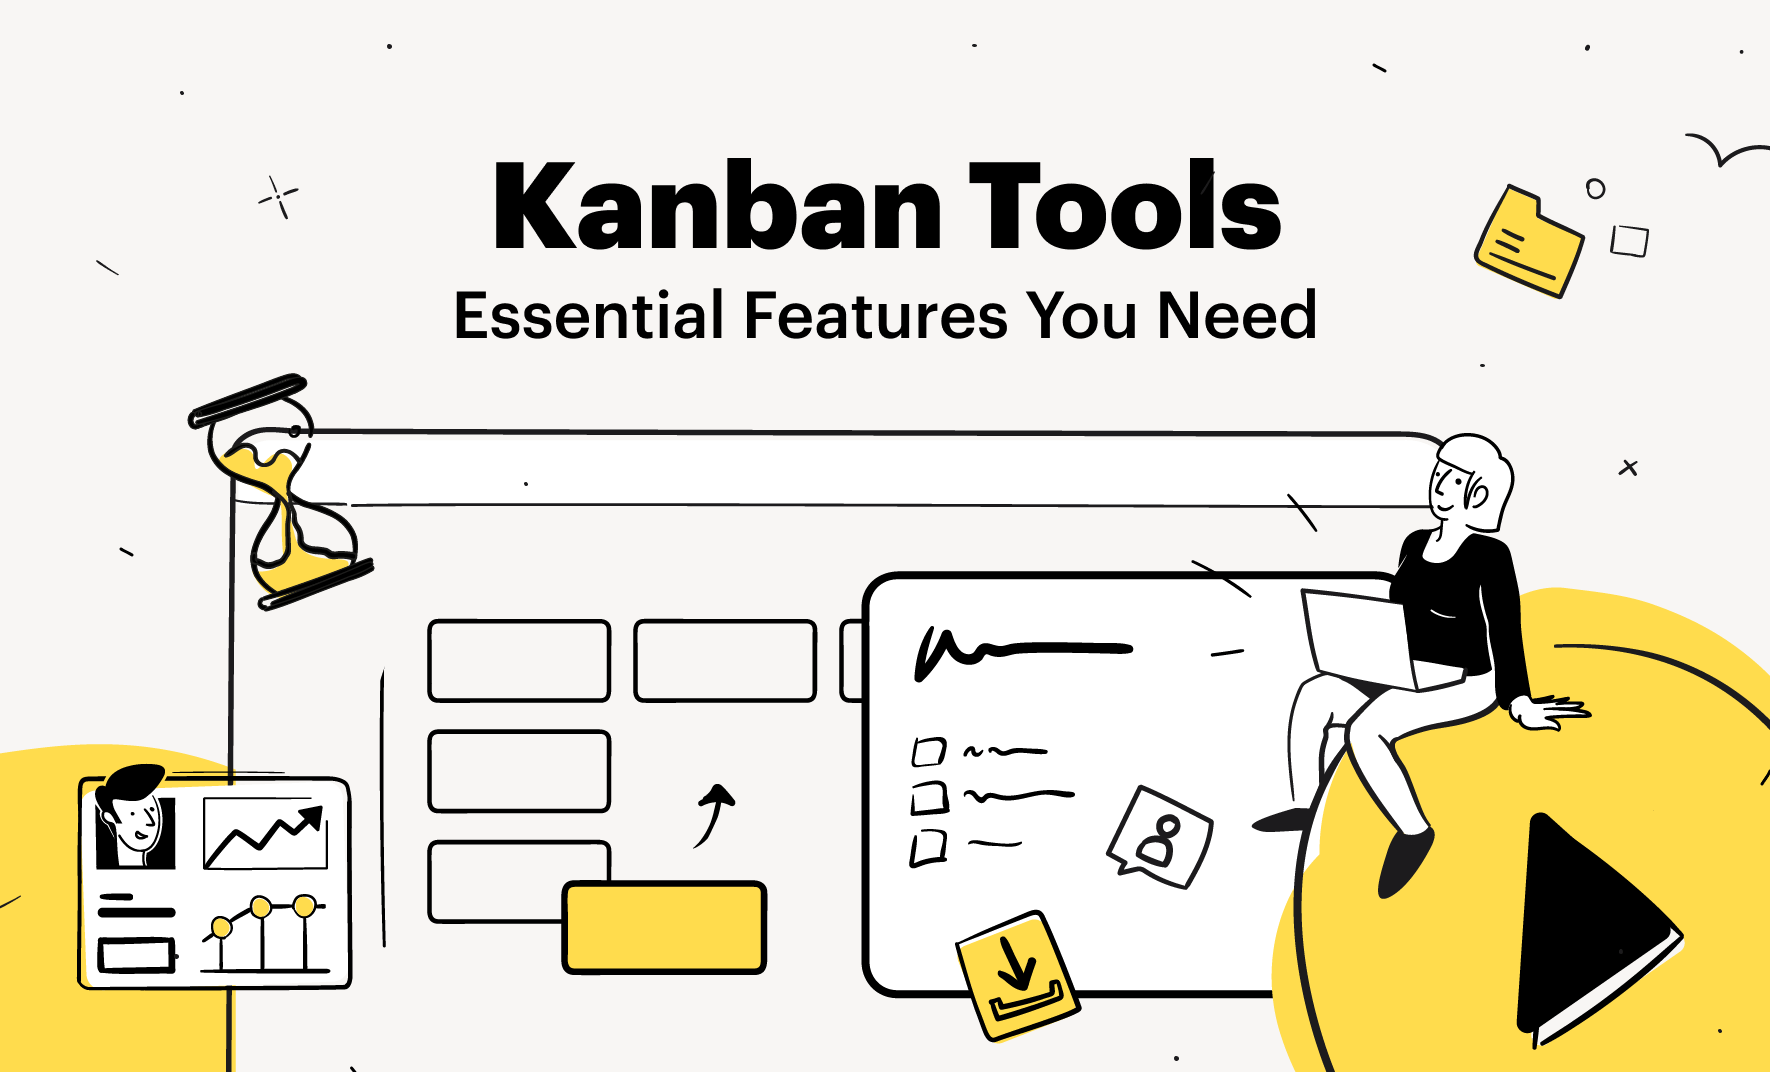 Kanban Tools - Essential Features You Need